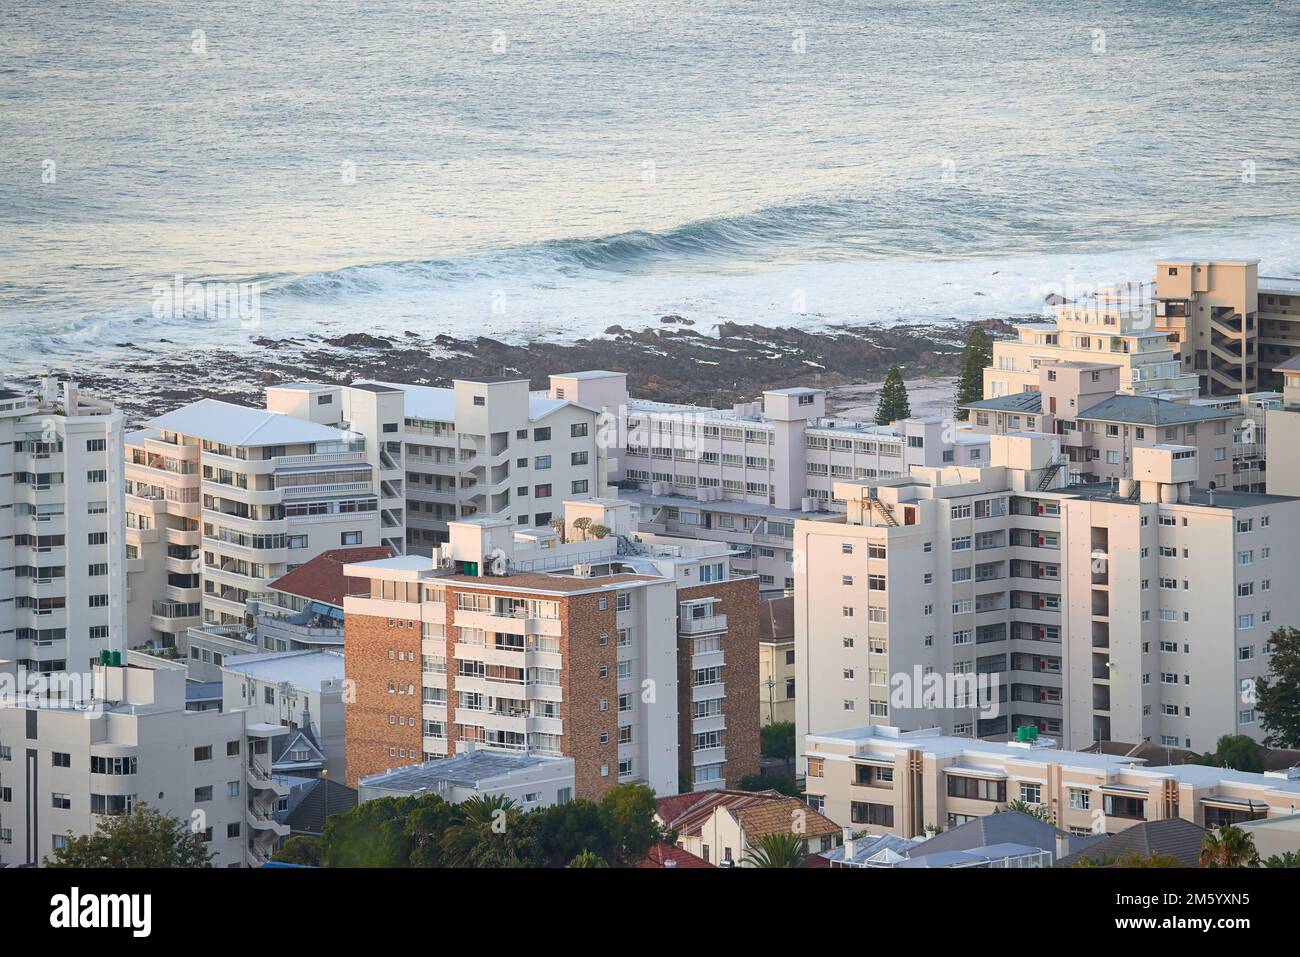 Sea Point - Cape Town. Beautiful Sea Point, Cape Town, South Africa. Stock Photo